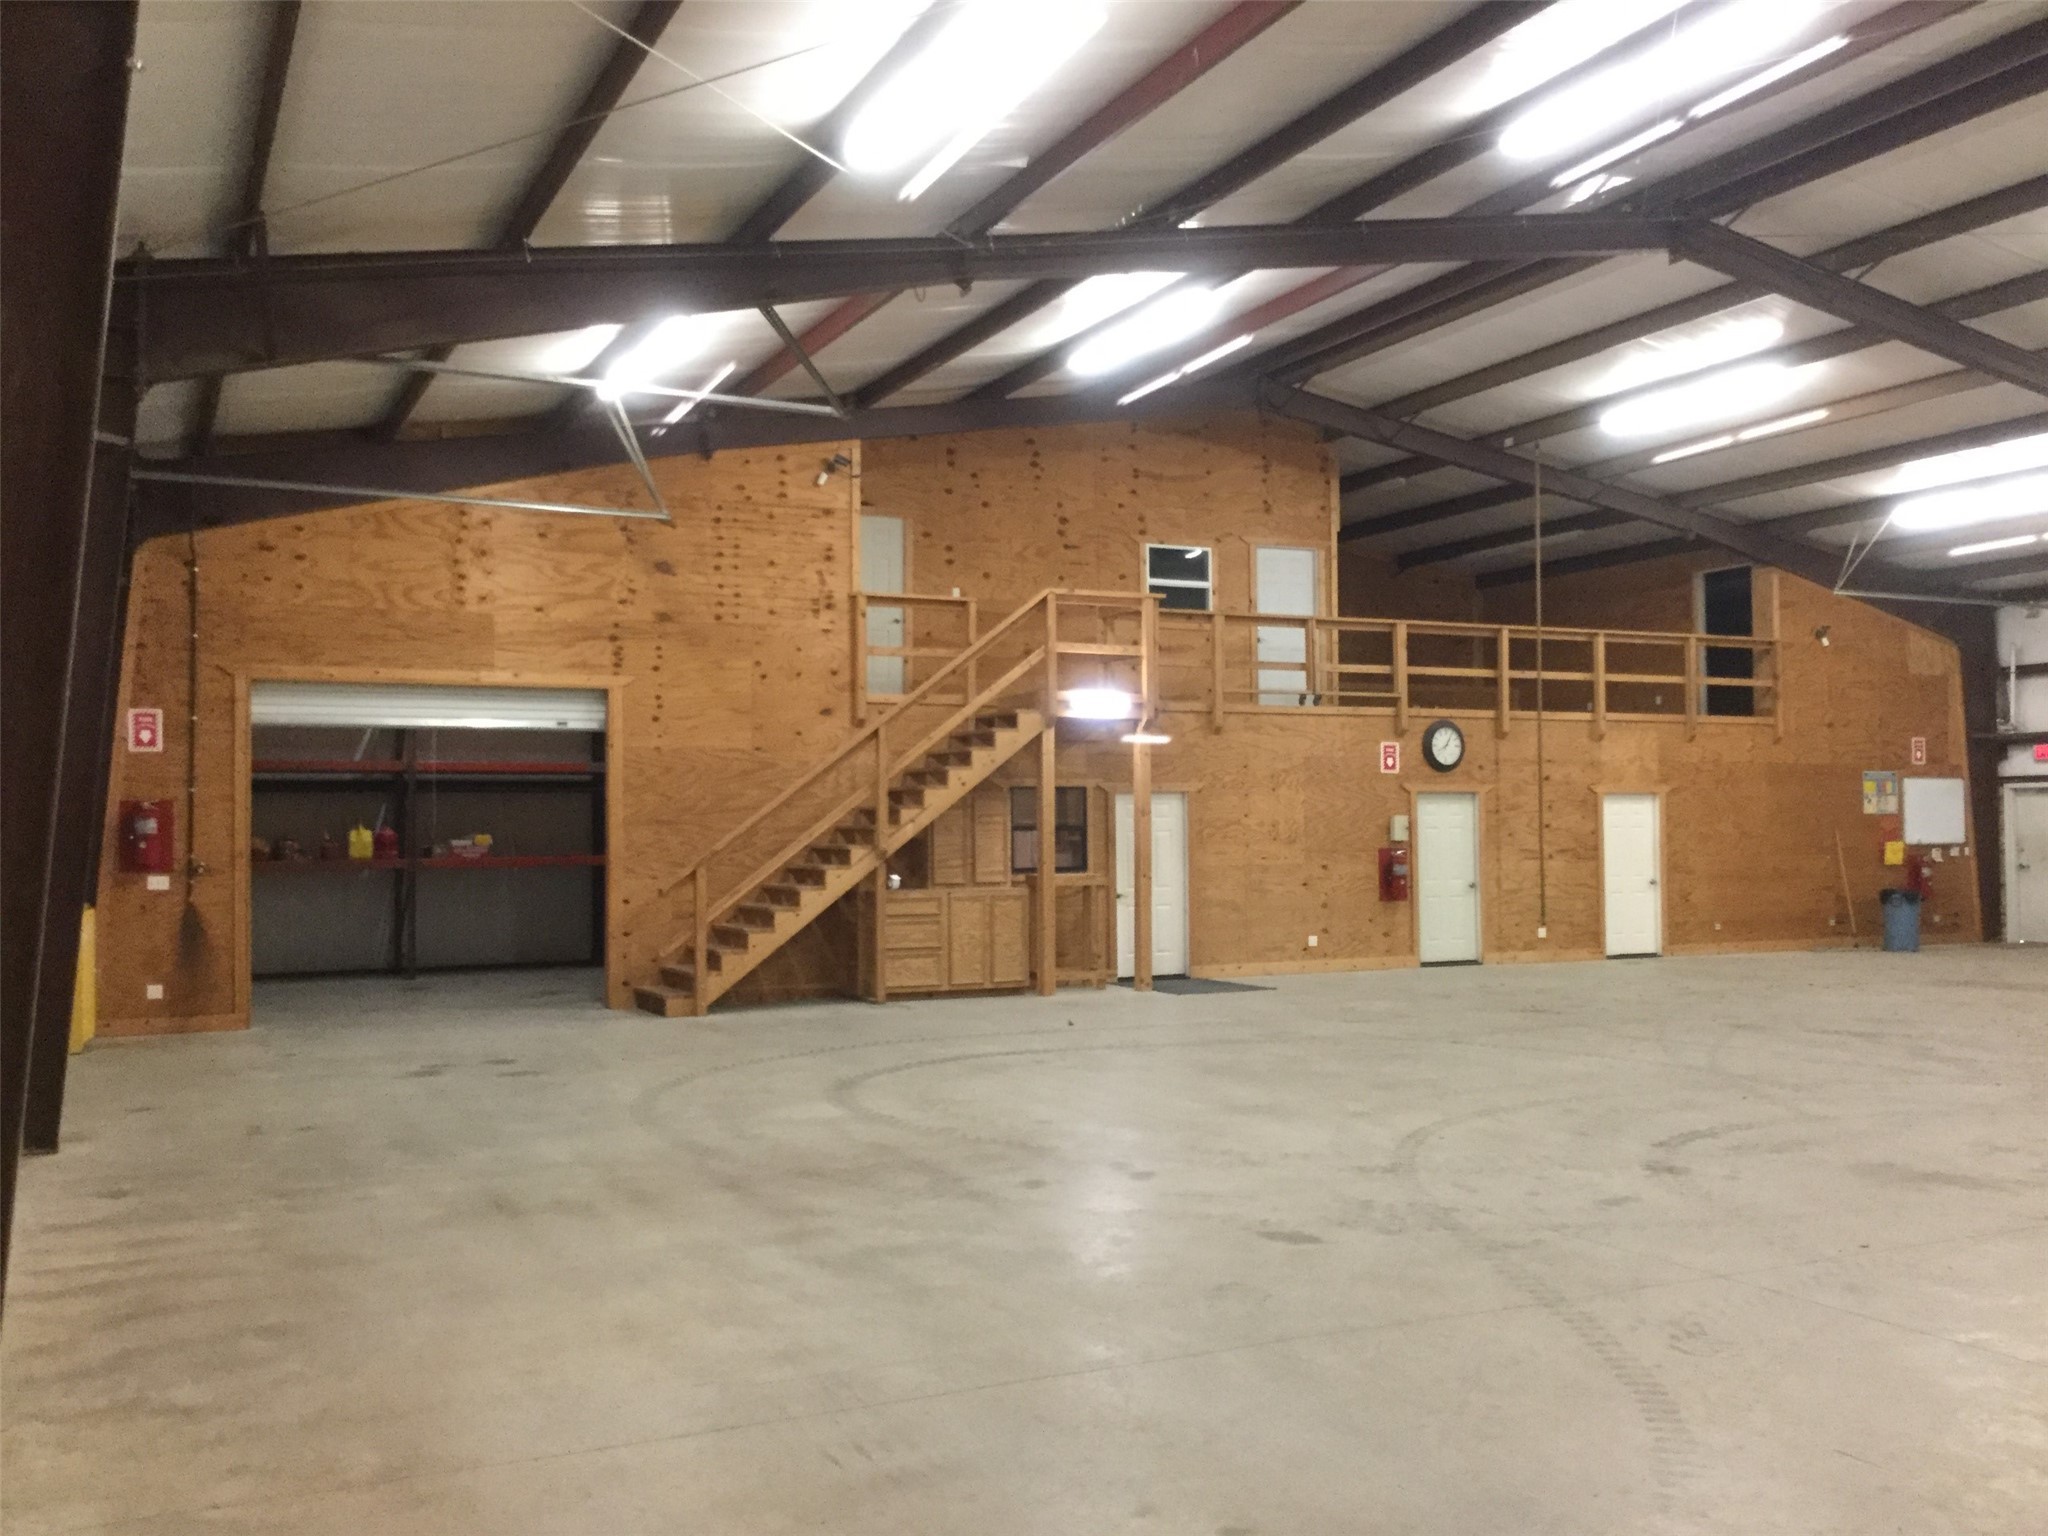 Exterior of 80'x60' warehouse/shop.  Three 16' overhead doors.  Office space is on the right side of the warehouse.